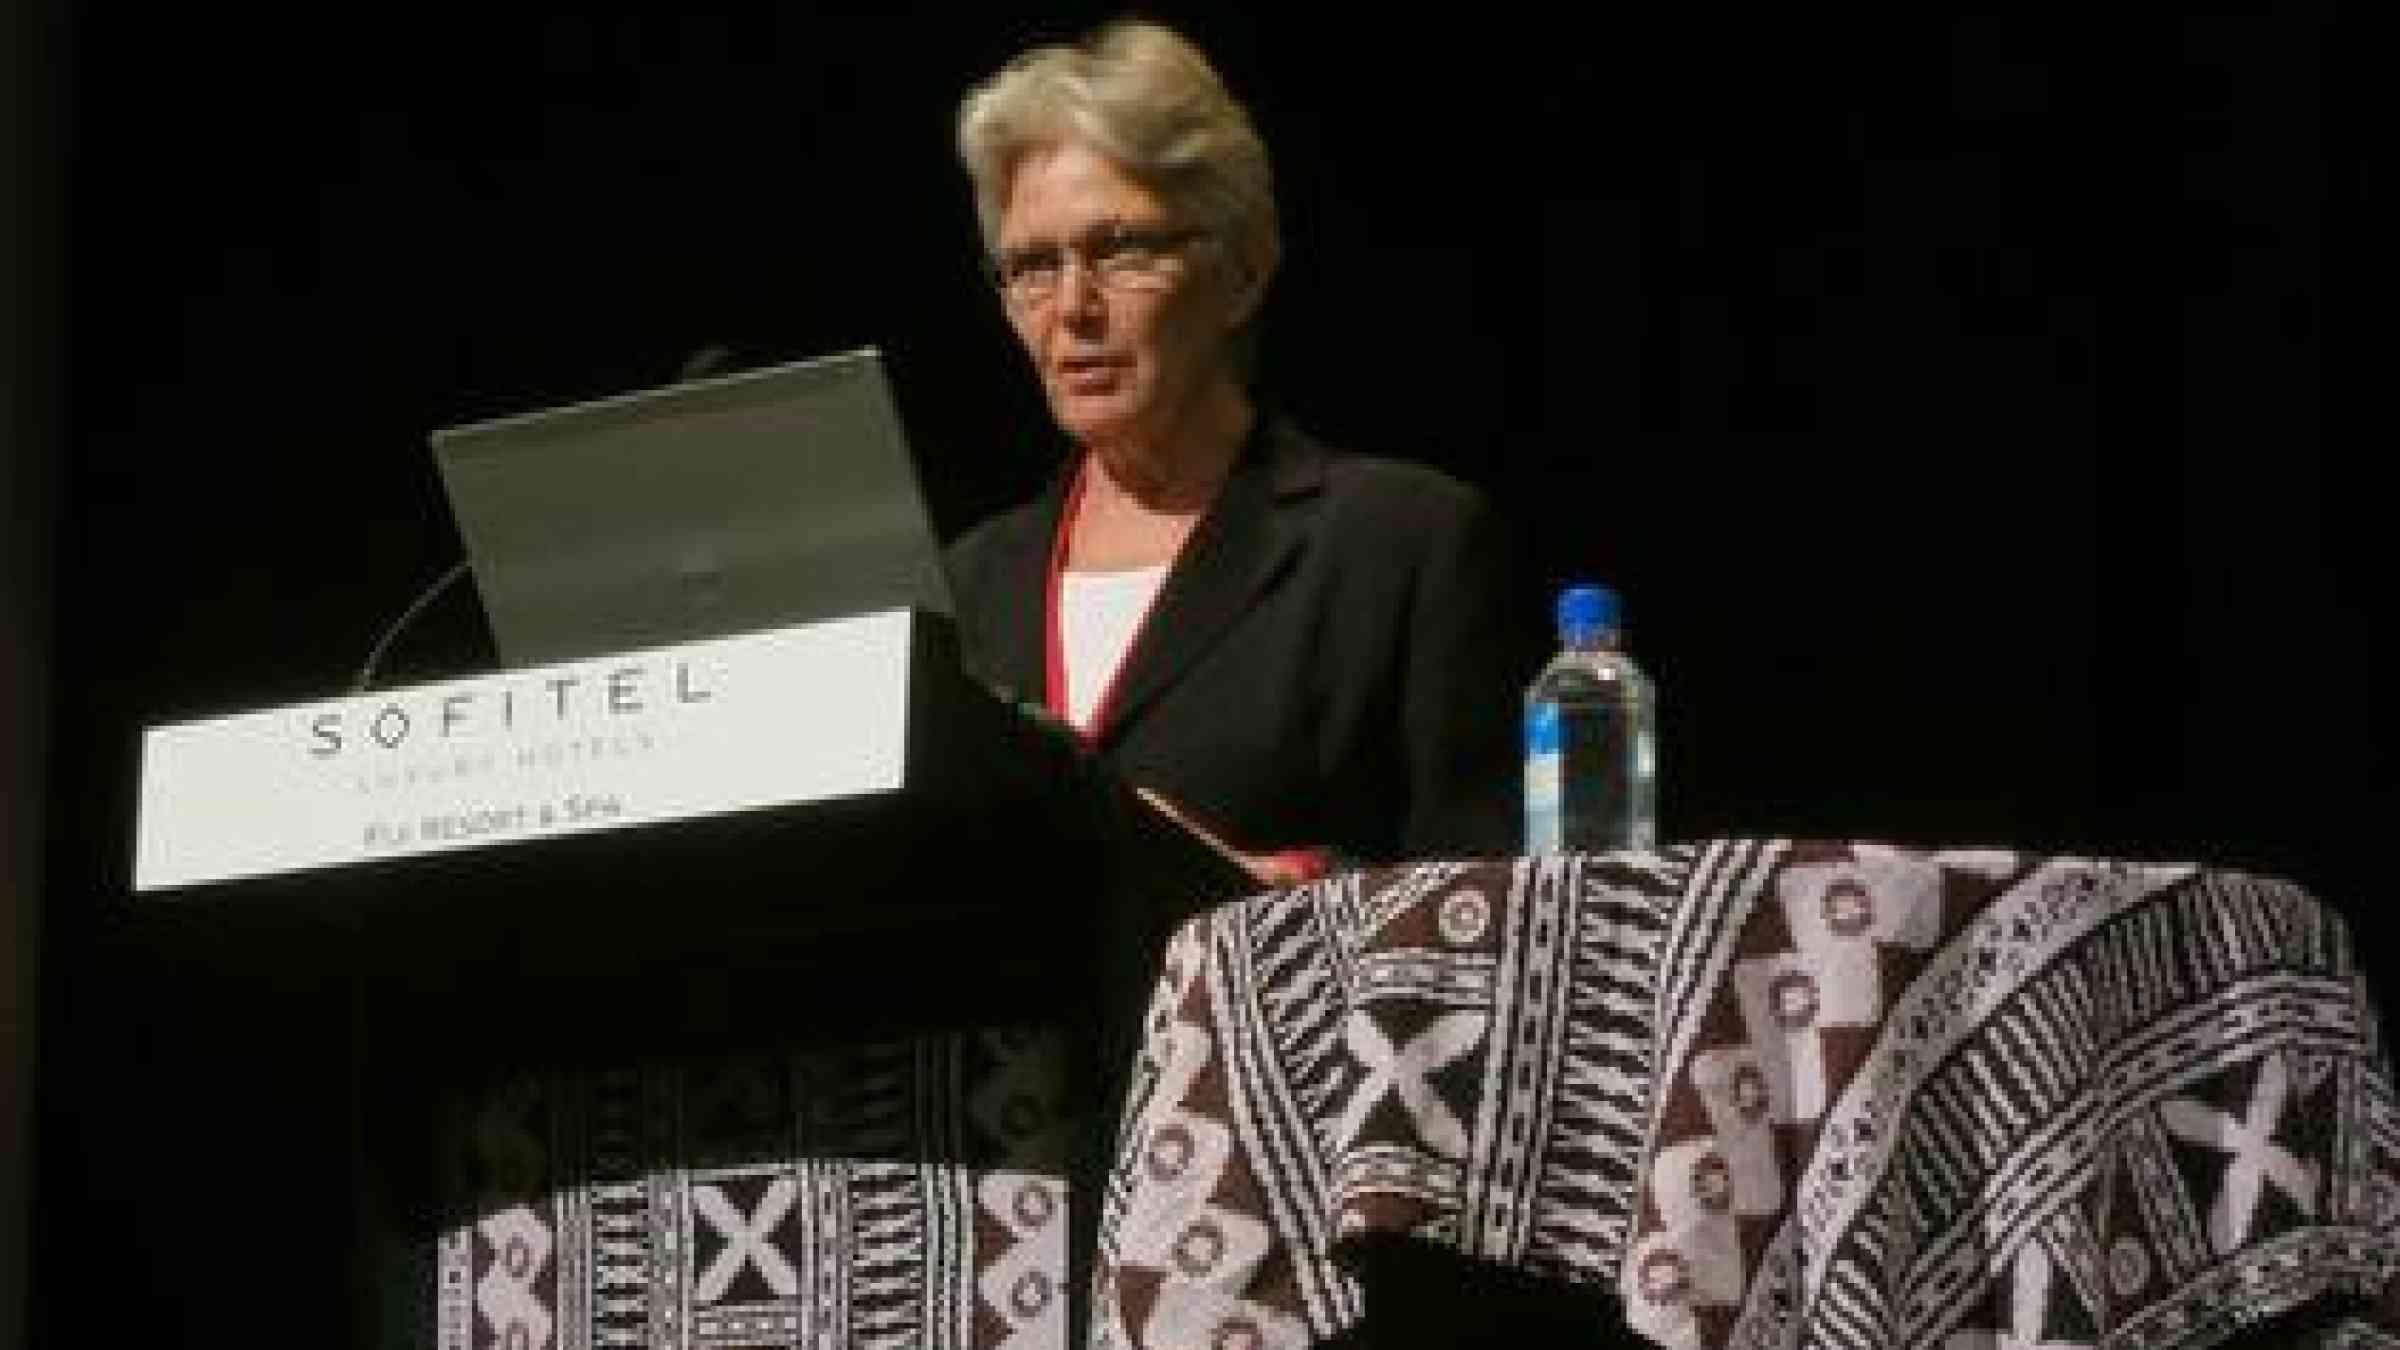 Ms Wahlström praises the 2013 Joint Meeting of the Pacific Platform for Disaster Risk Management and Pacific Climate Change Roundtable in Fiji for blazing the trail of integrated strategy and action.